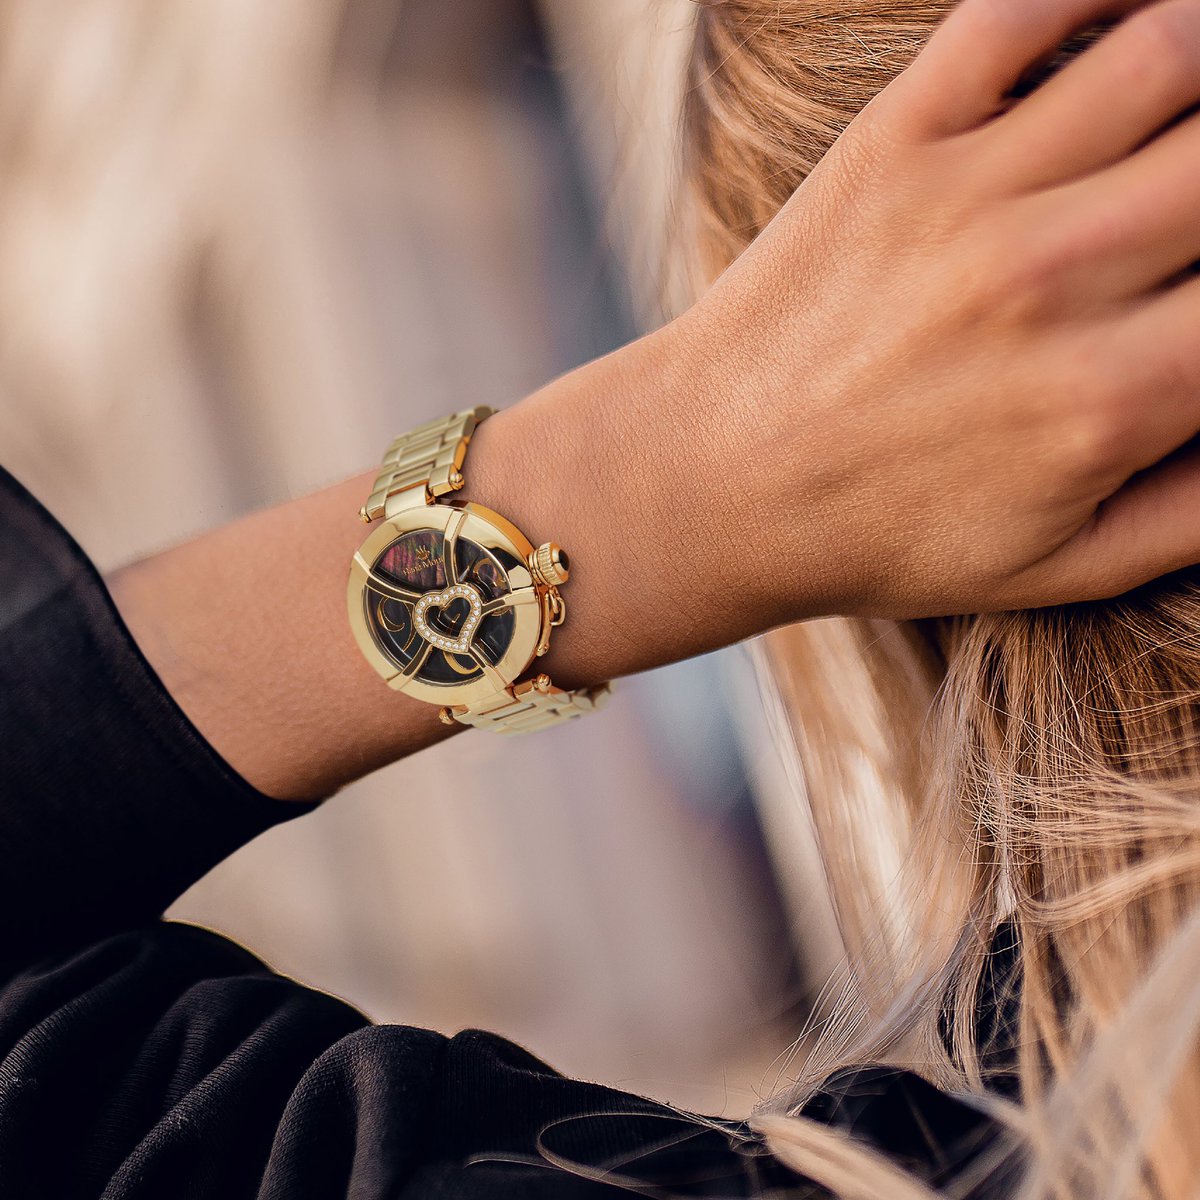 Nothing is more #charming than a lady put on a vogue #CoeurdAmour collection on her wrist. #RenéMouris
.
.
.
To get more info of Coeur d’Amour Collection: bit.ly/2YbaWOp
#Watches #Timepiece #ReneMouris #FridayMood #Watchstagram #StyleInspiration #LadiesWatch #Montres